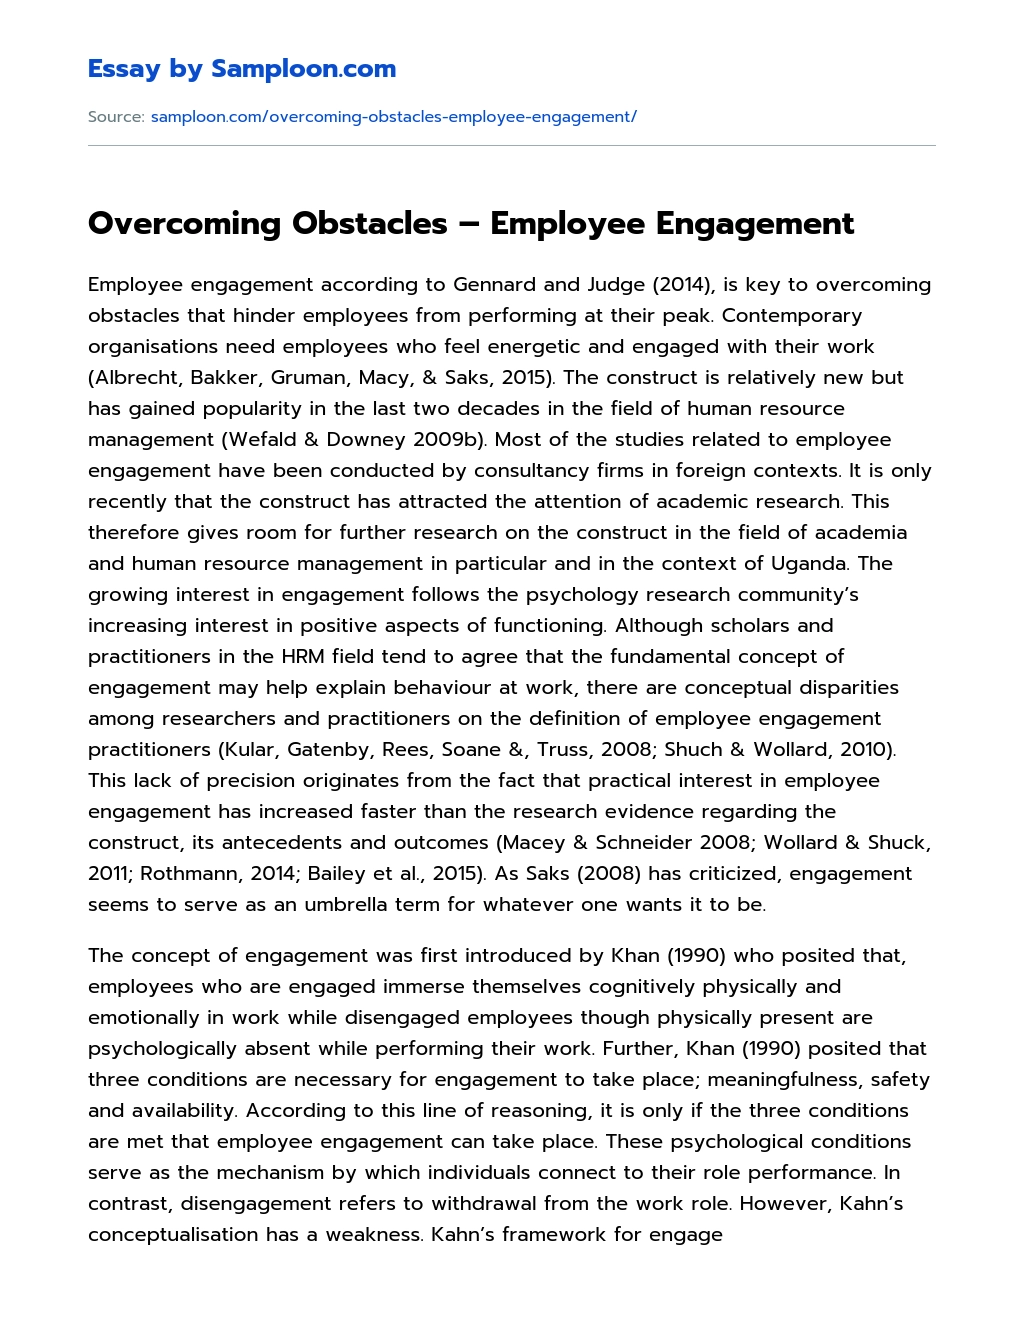 Overcoming Obstacles – Employee Engagement Narrative Essay essay